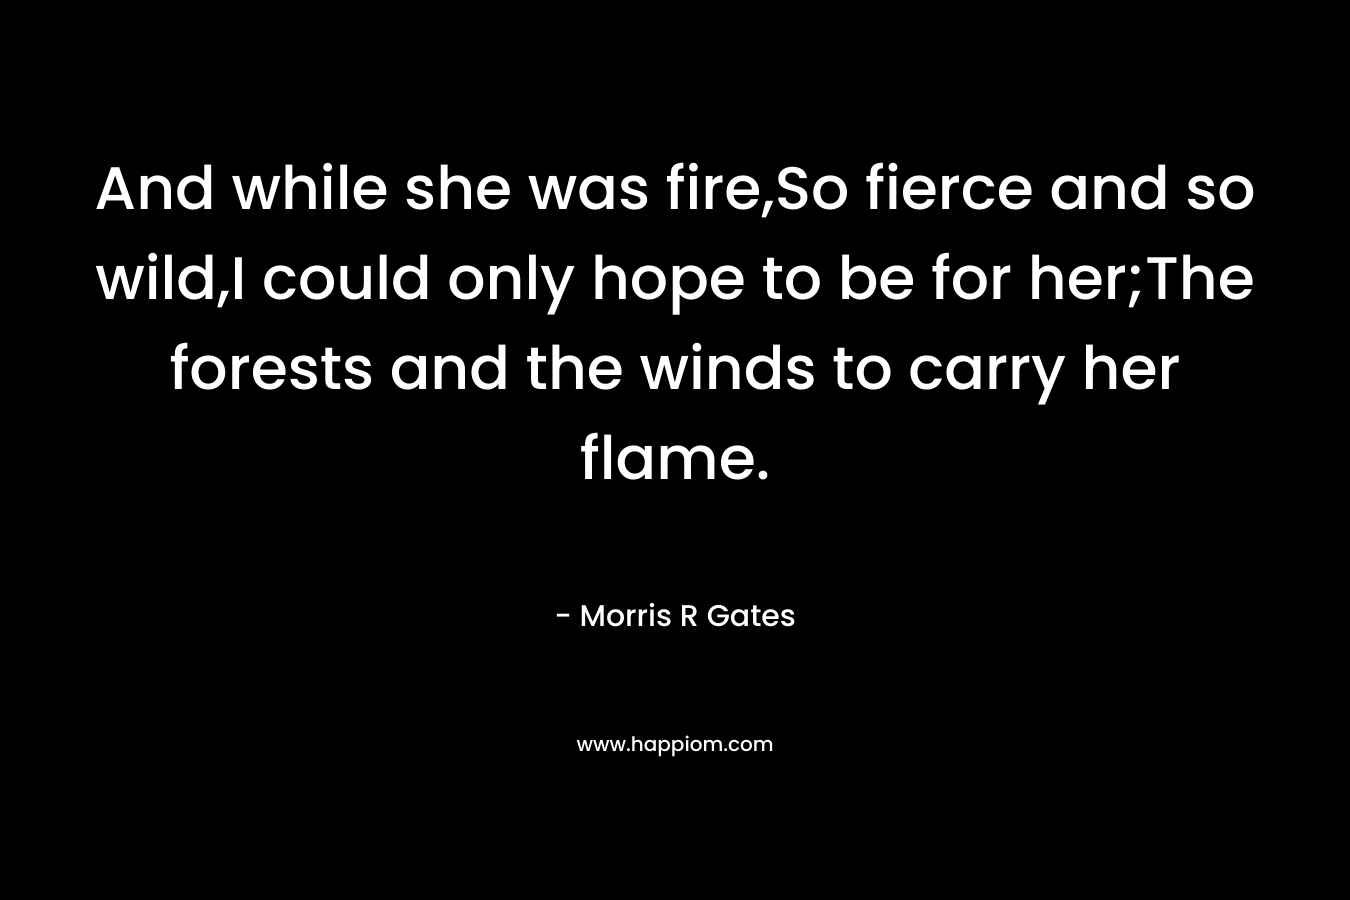 And while she was fire,So fierce and so wild,I could only hope to be for her;The forests and the winds to carry her flame.